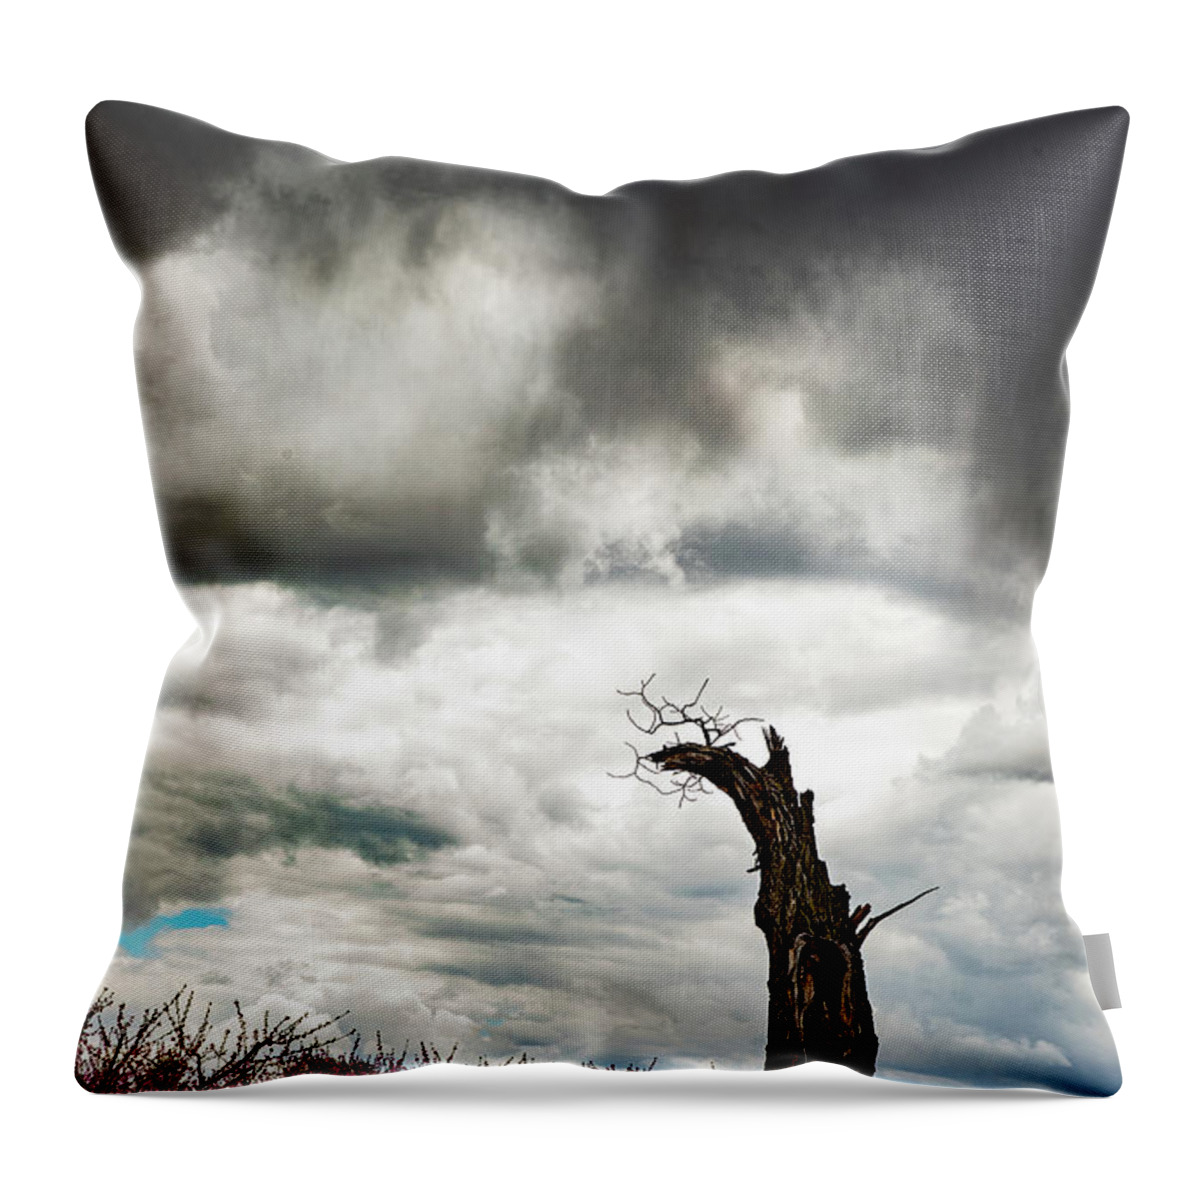 Clouds Throw Pillow featuring the photograph Descending by Marilyn Cornwell